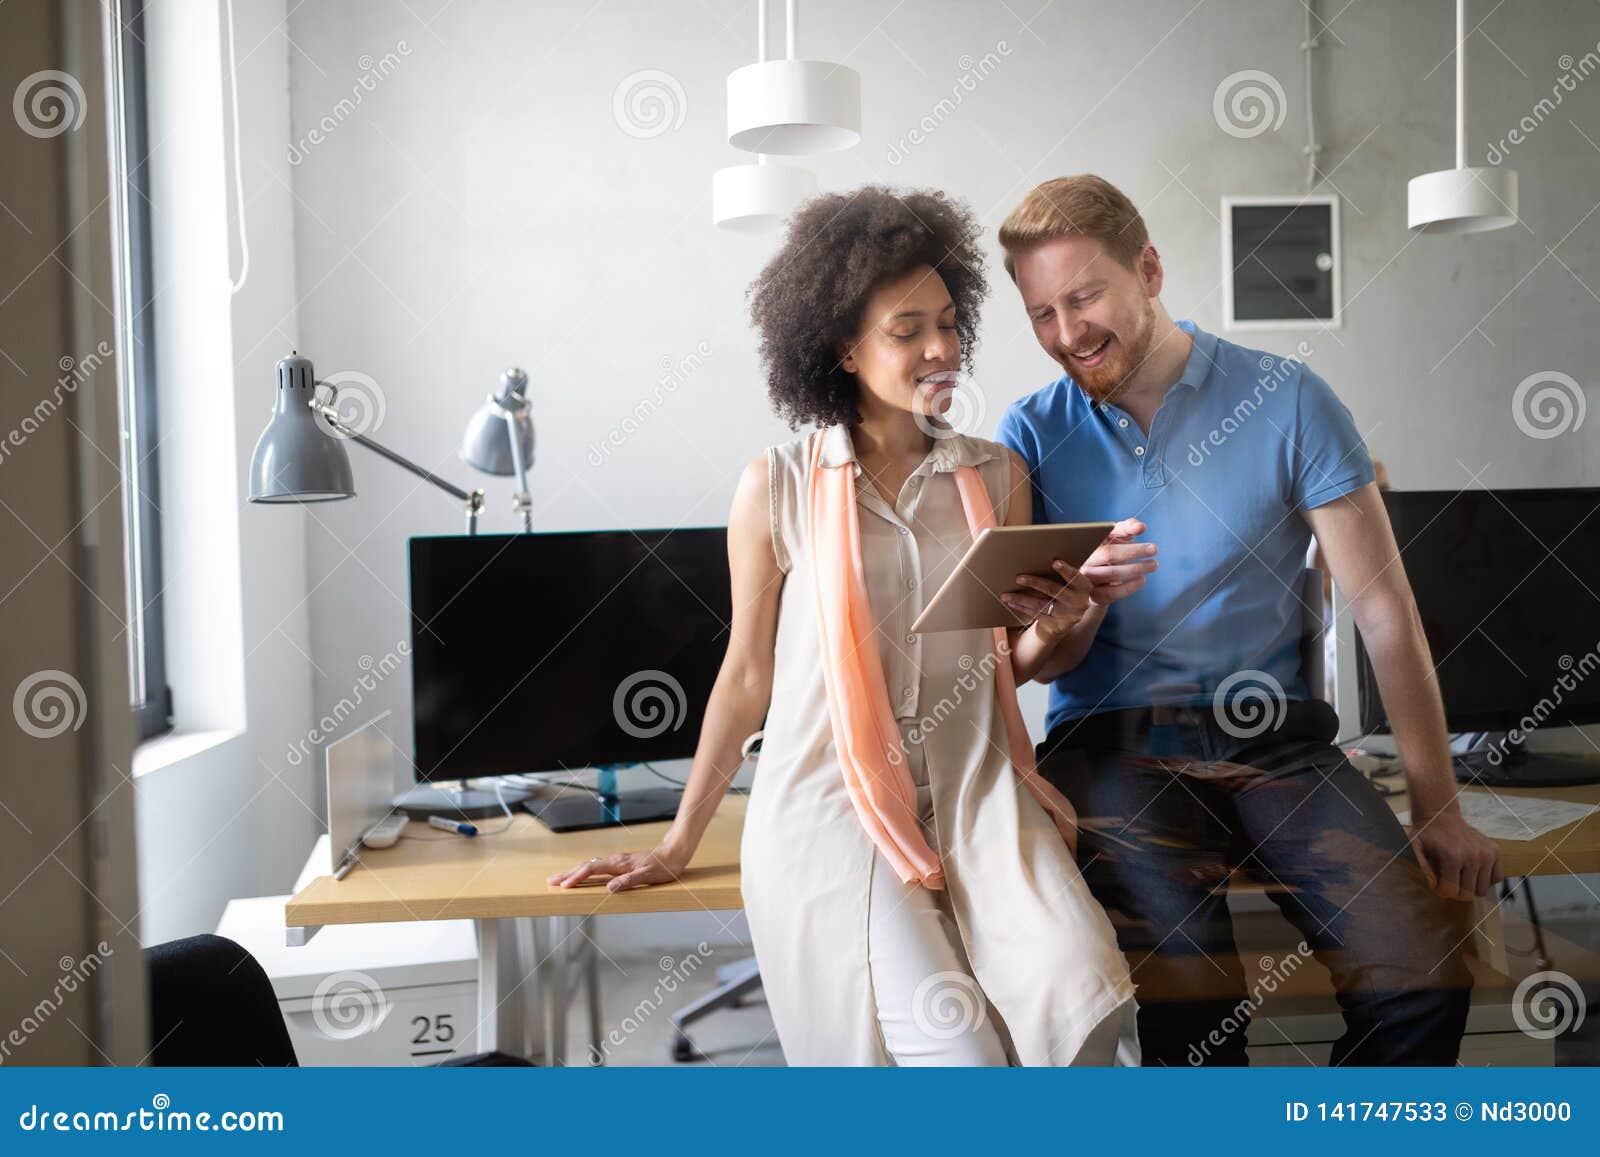 Programmer Working in a Software Developing Company Office Stock Image ...